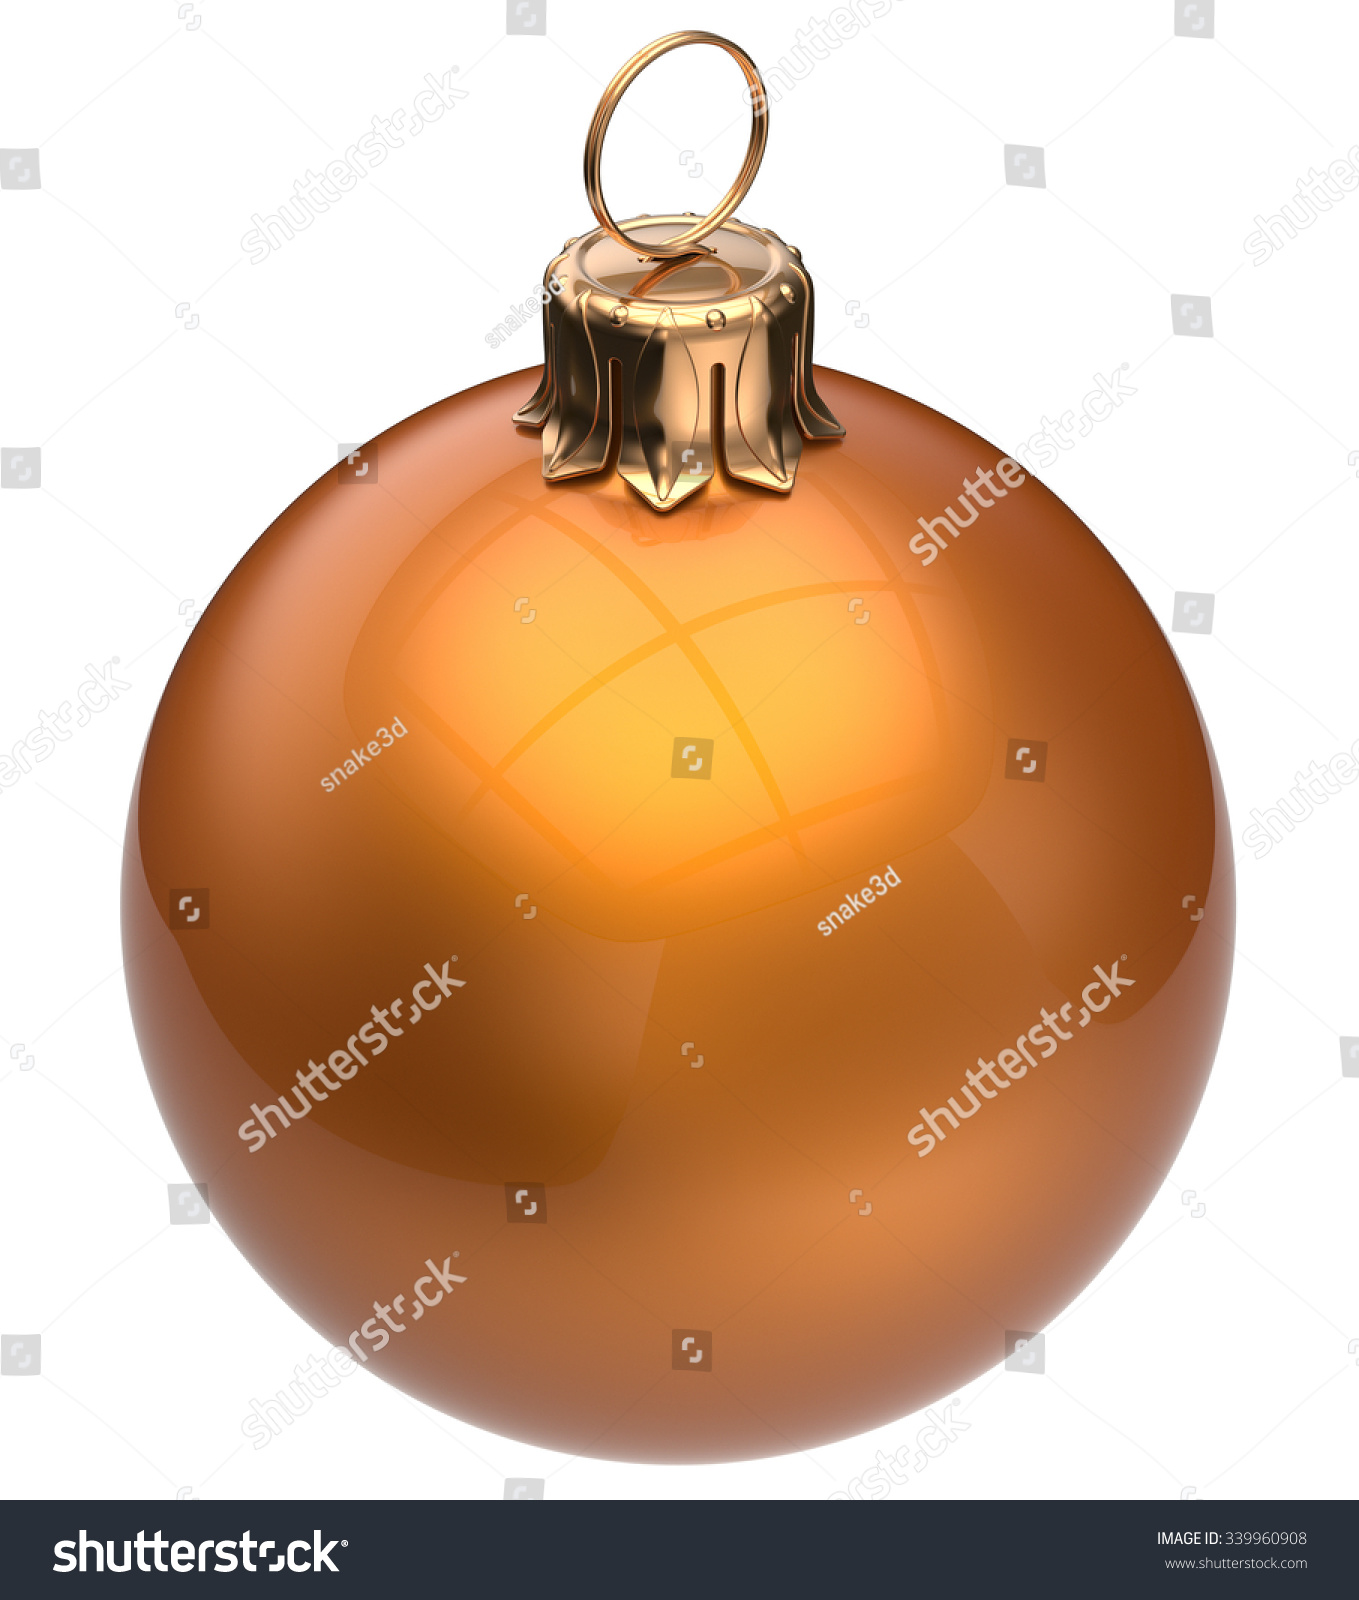 Christmas ball orange New Year s Eve bauble wintertime decoration glossy sphere hanging adornment classic Traditional